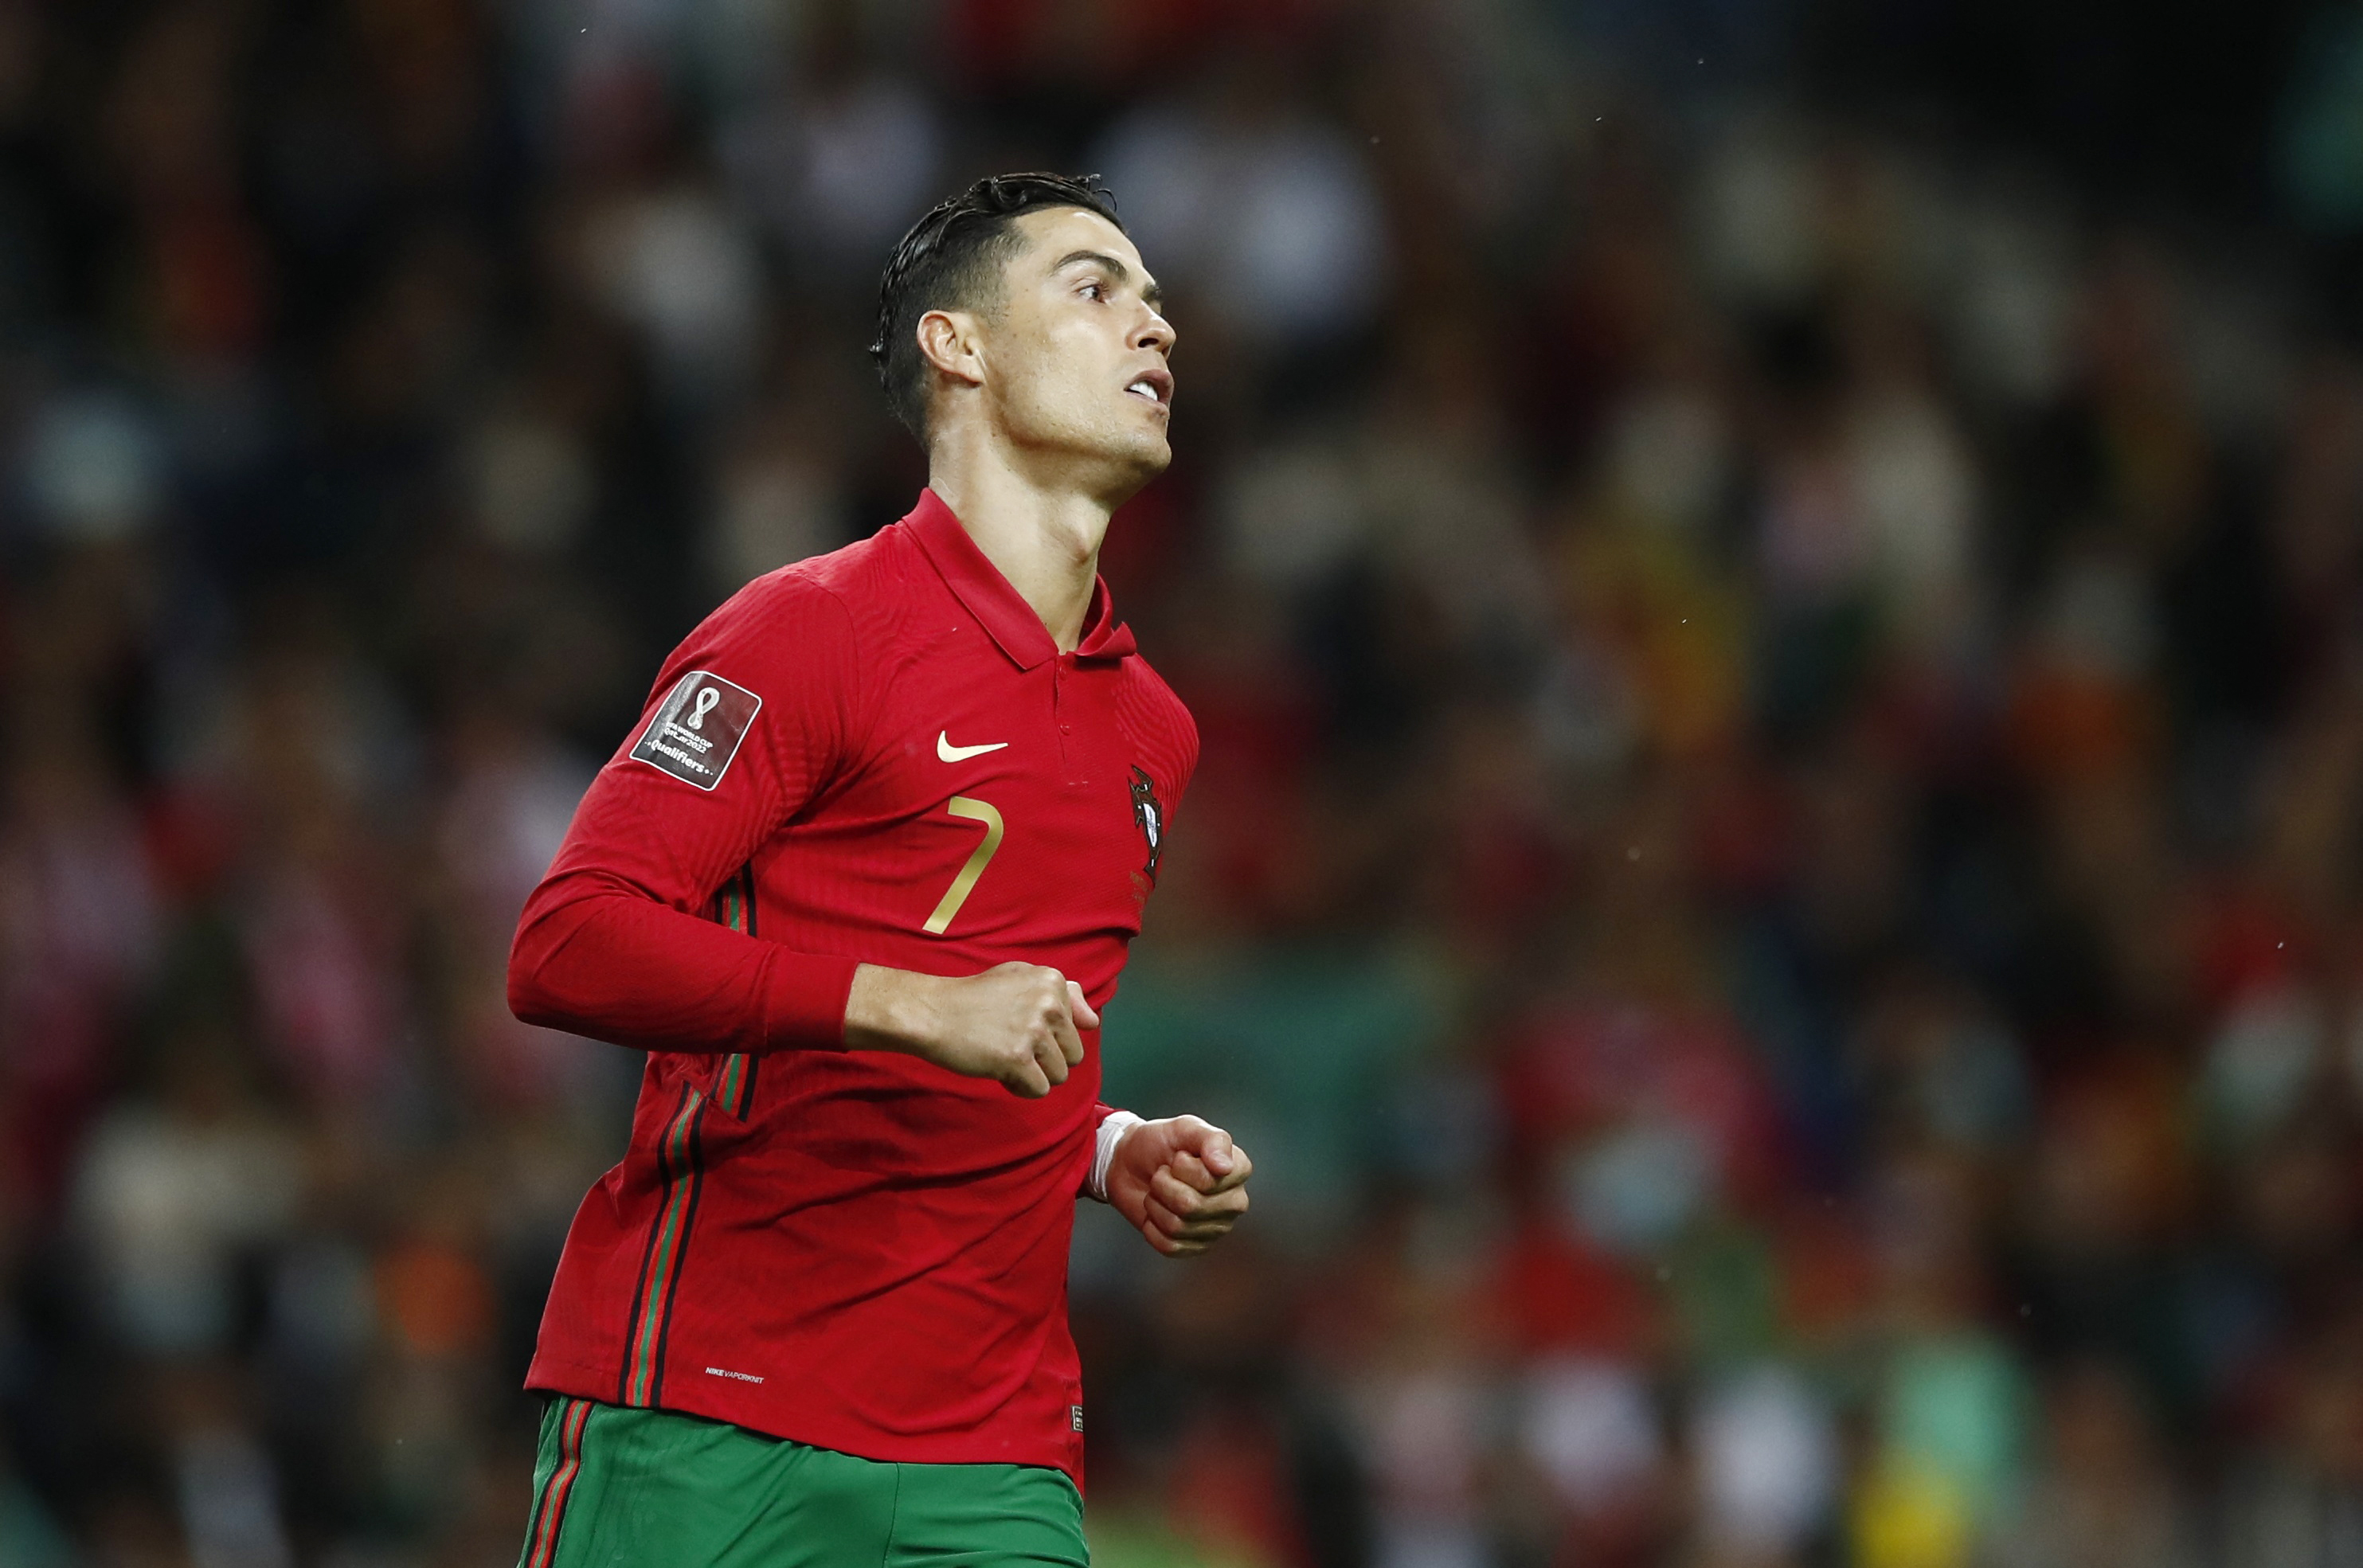 WATCH LIVE Portugal vs Macedonia with Cristiano Ronaldo, qualifying match for the Qatar 2022 World Cup